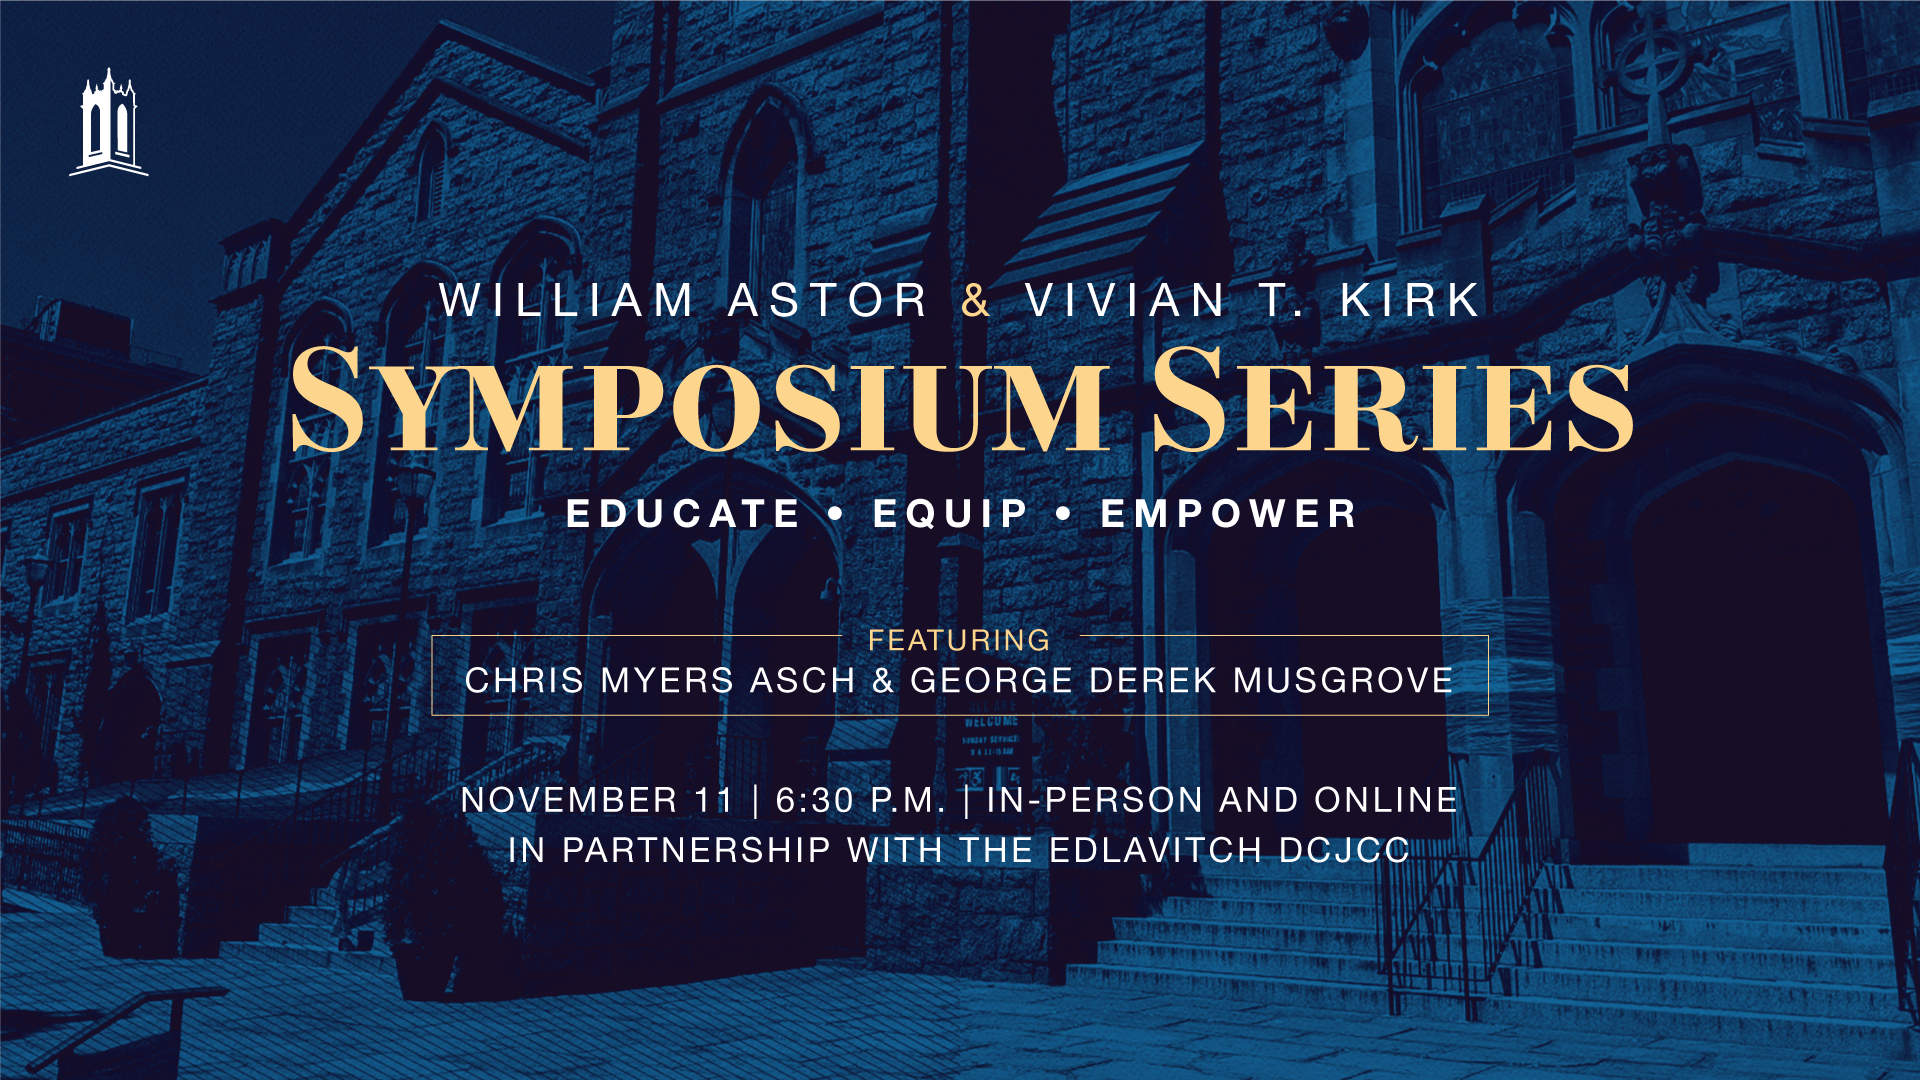 William Astor and Vivian T. Kirk Symposium Lecture with Dr. Chris Myers Asch and Dr. George Derek Musgrove